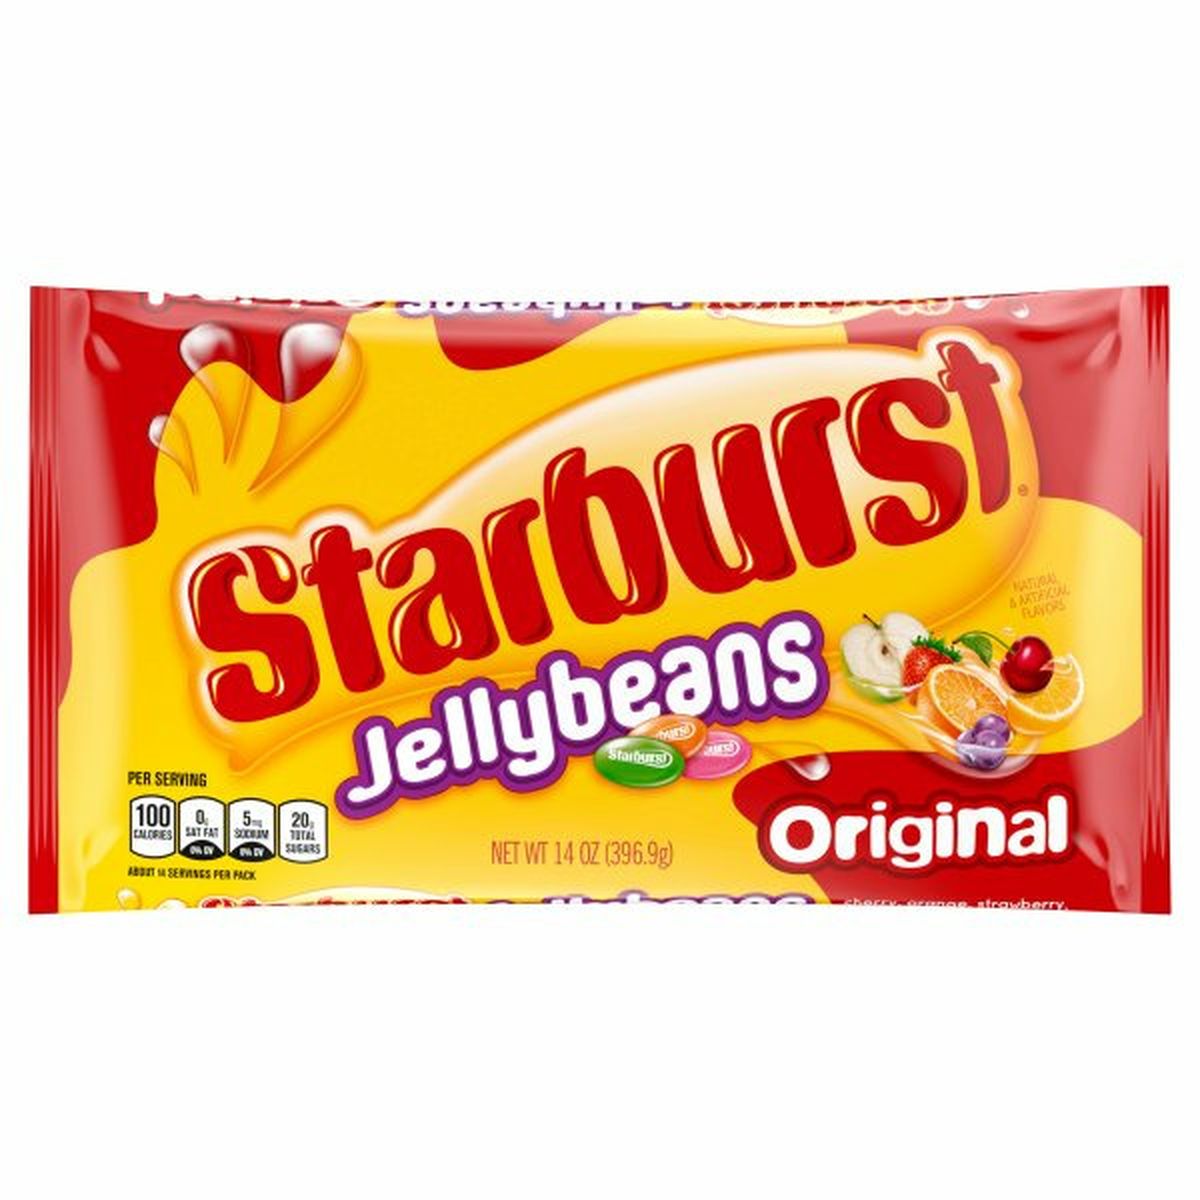 Calories in Starburst Original Easter Jellybeans Candy